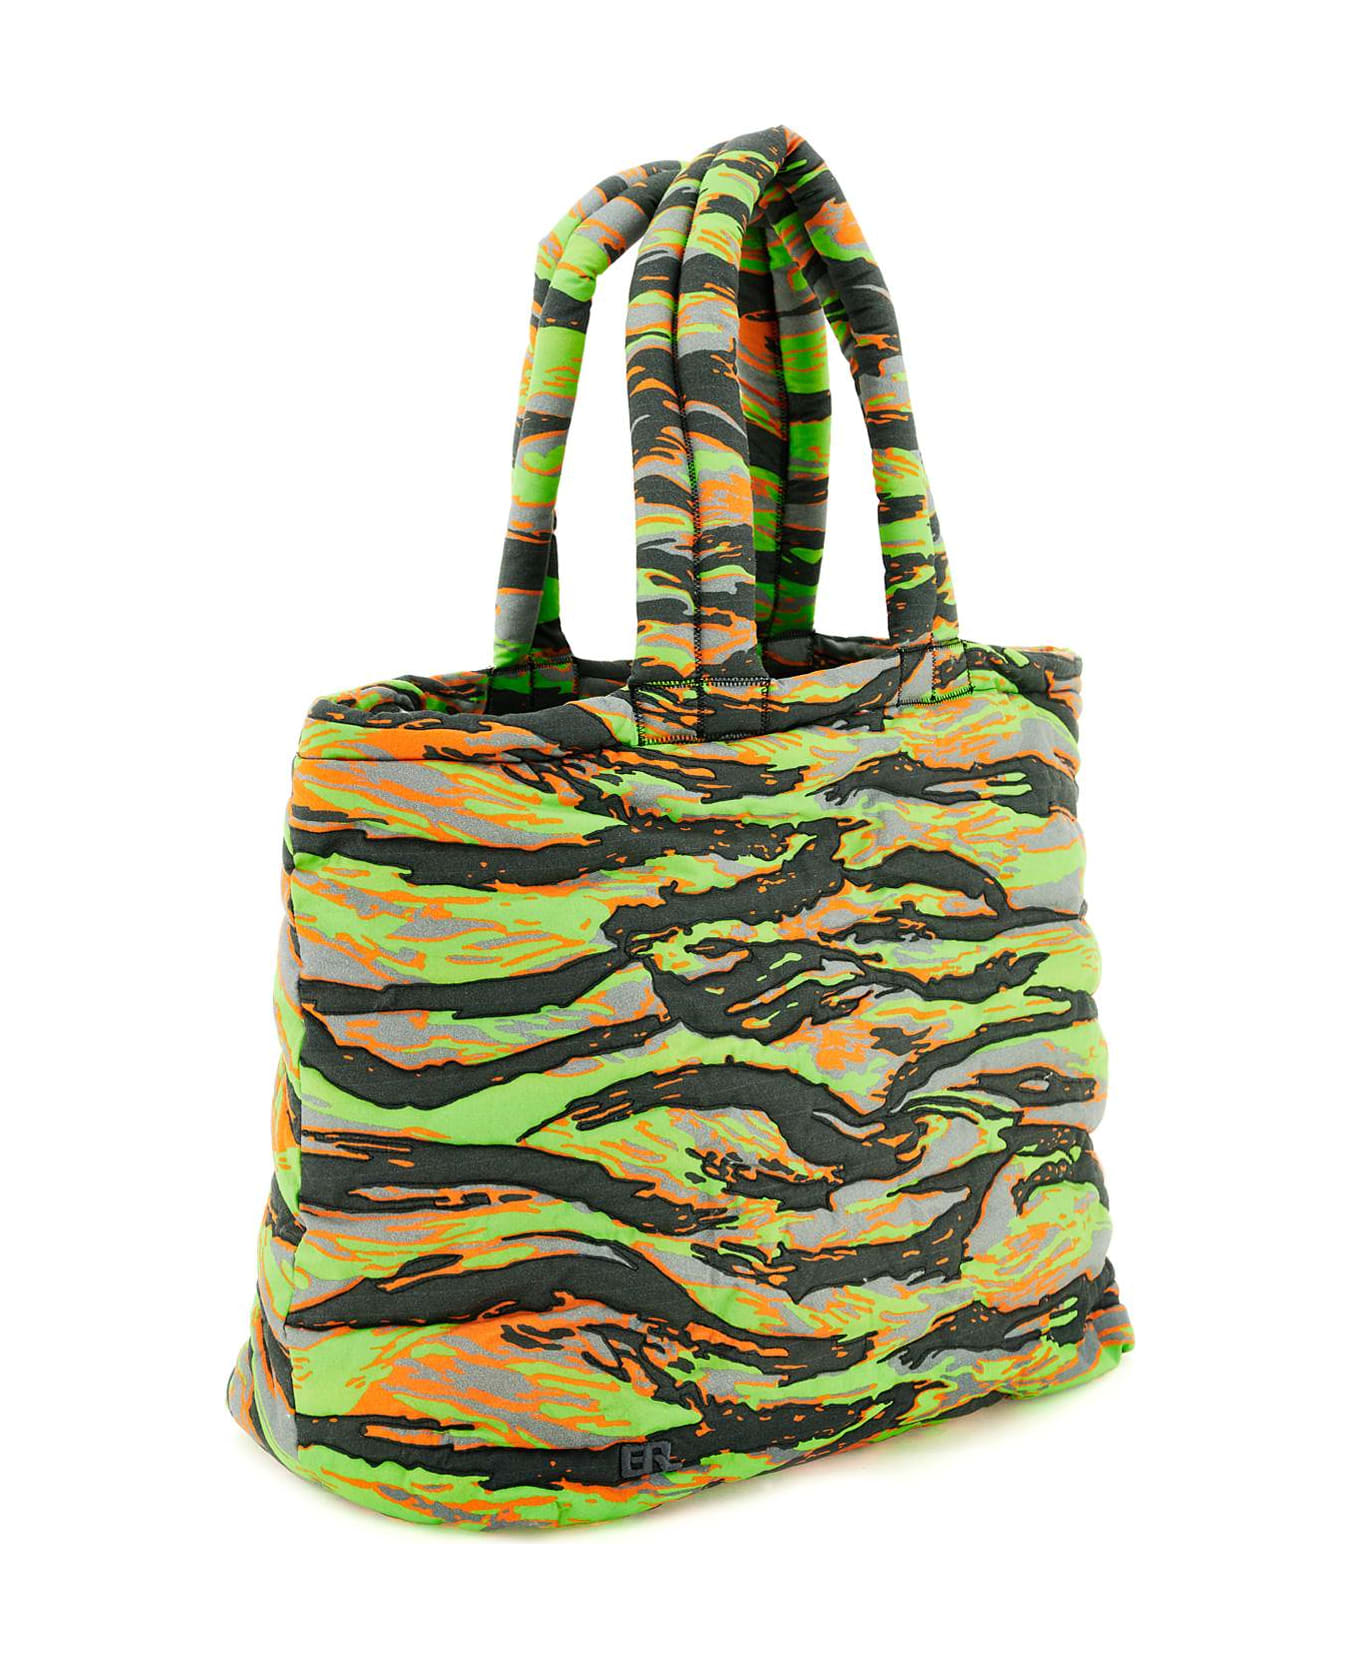 ERL Camouflage Puffer Bag - ERL GREEN RAVE CAMO 1 (Grey)